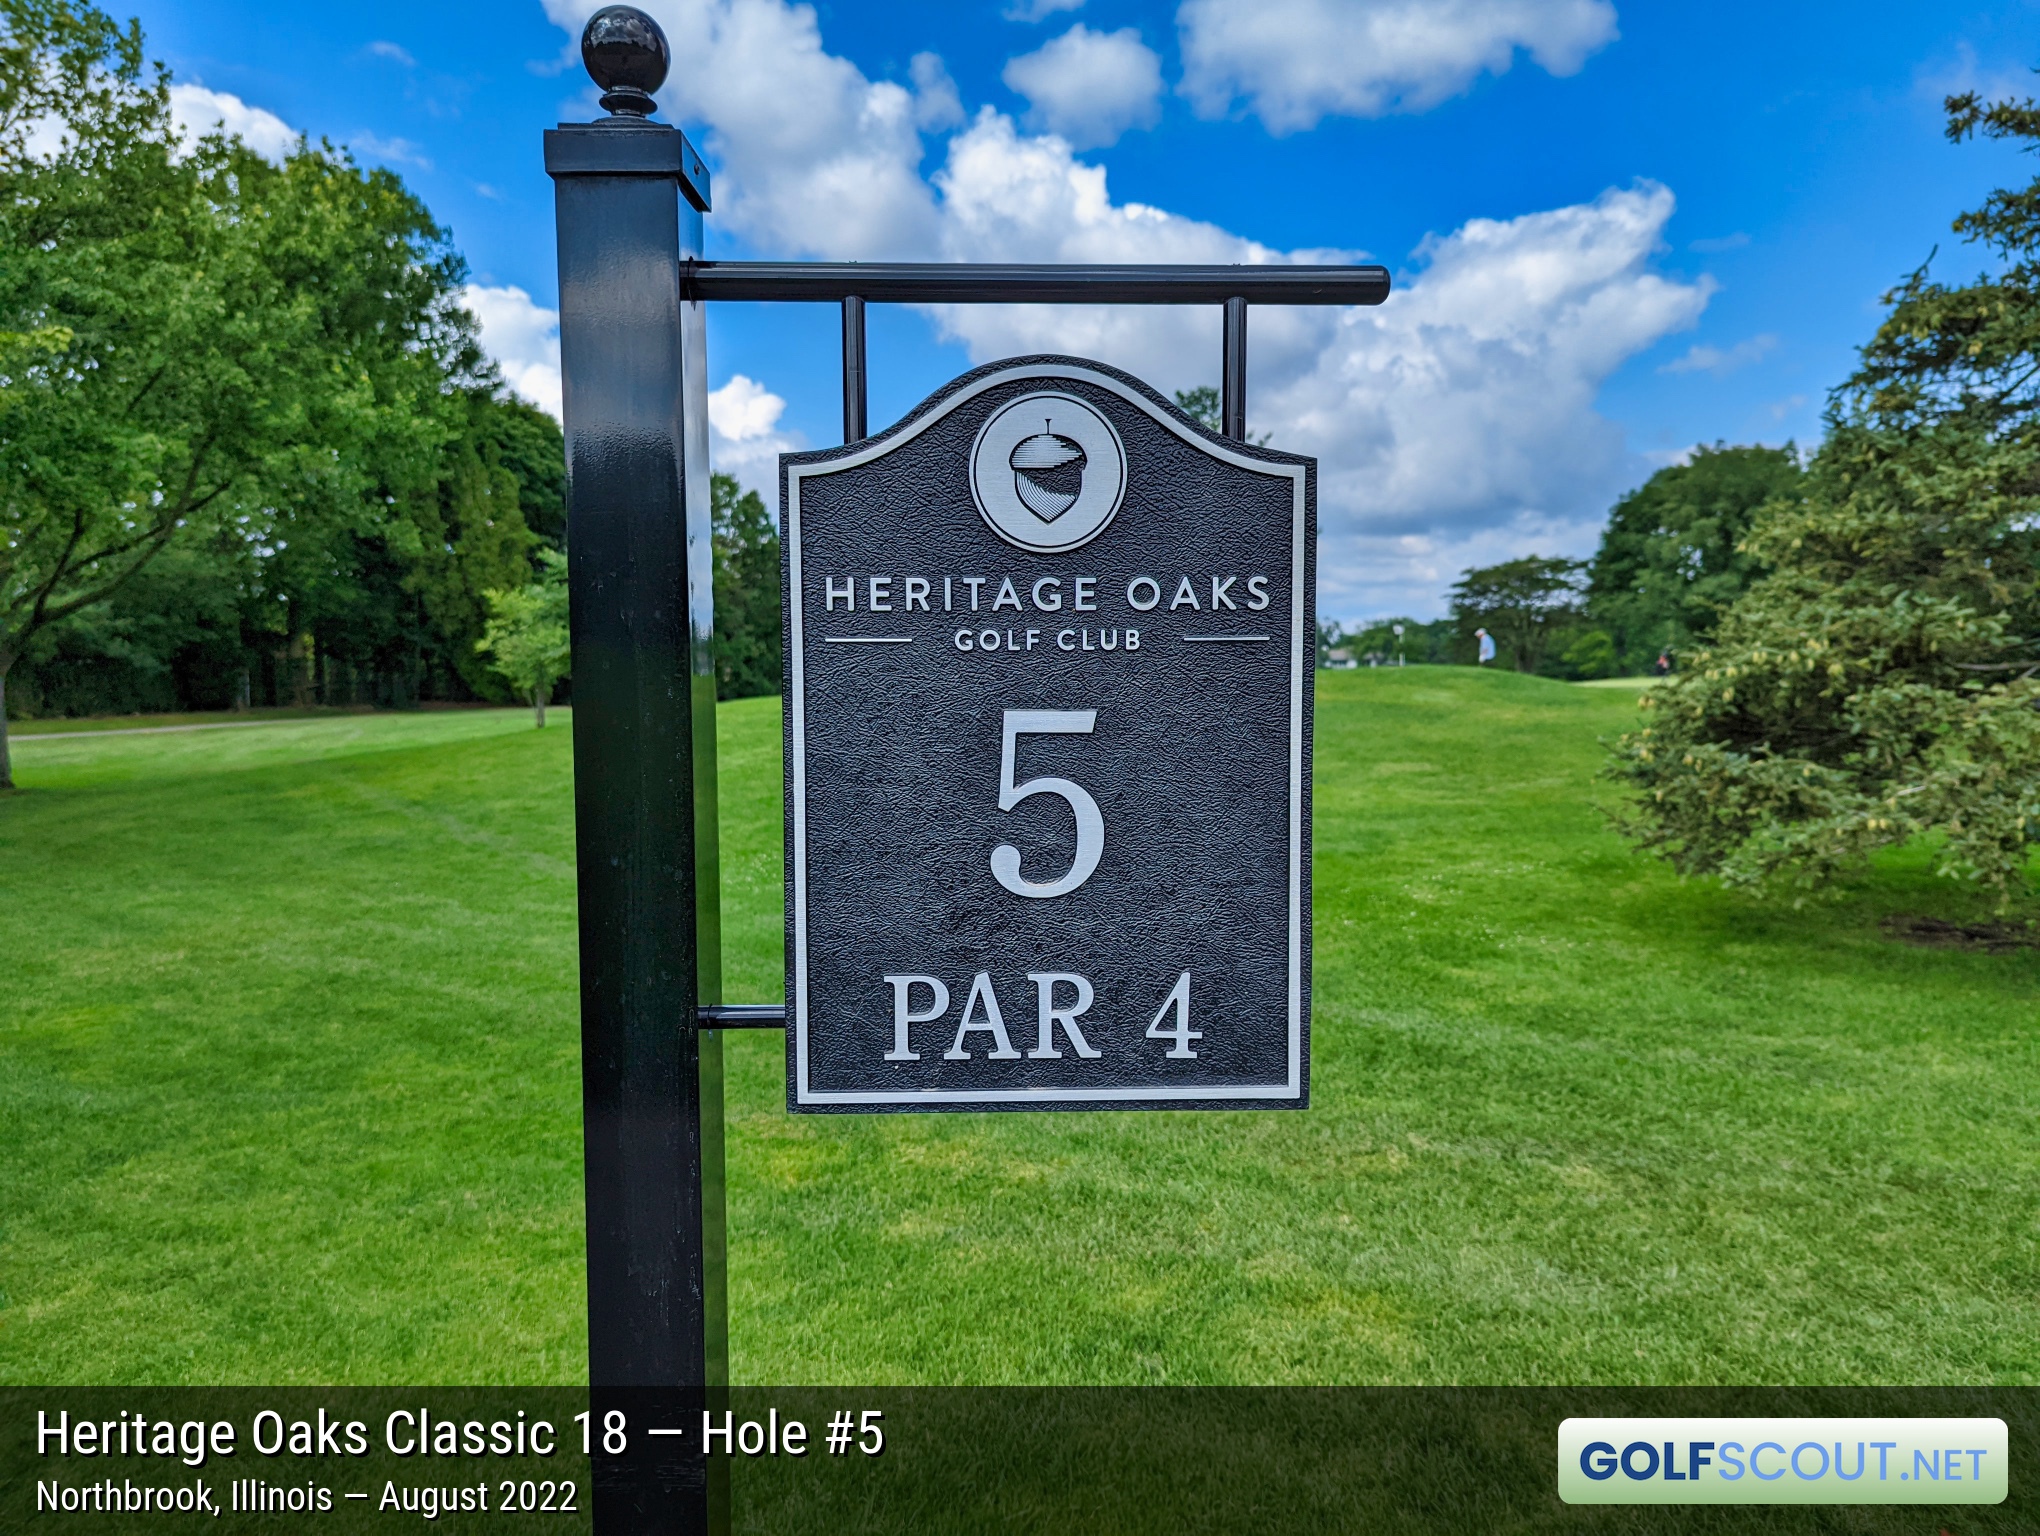 Photo of hole #5 at Heritage Oaks Golf Club - Classic 18 in Northbrook, Illinois. 